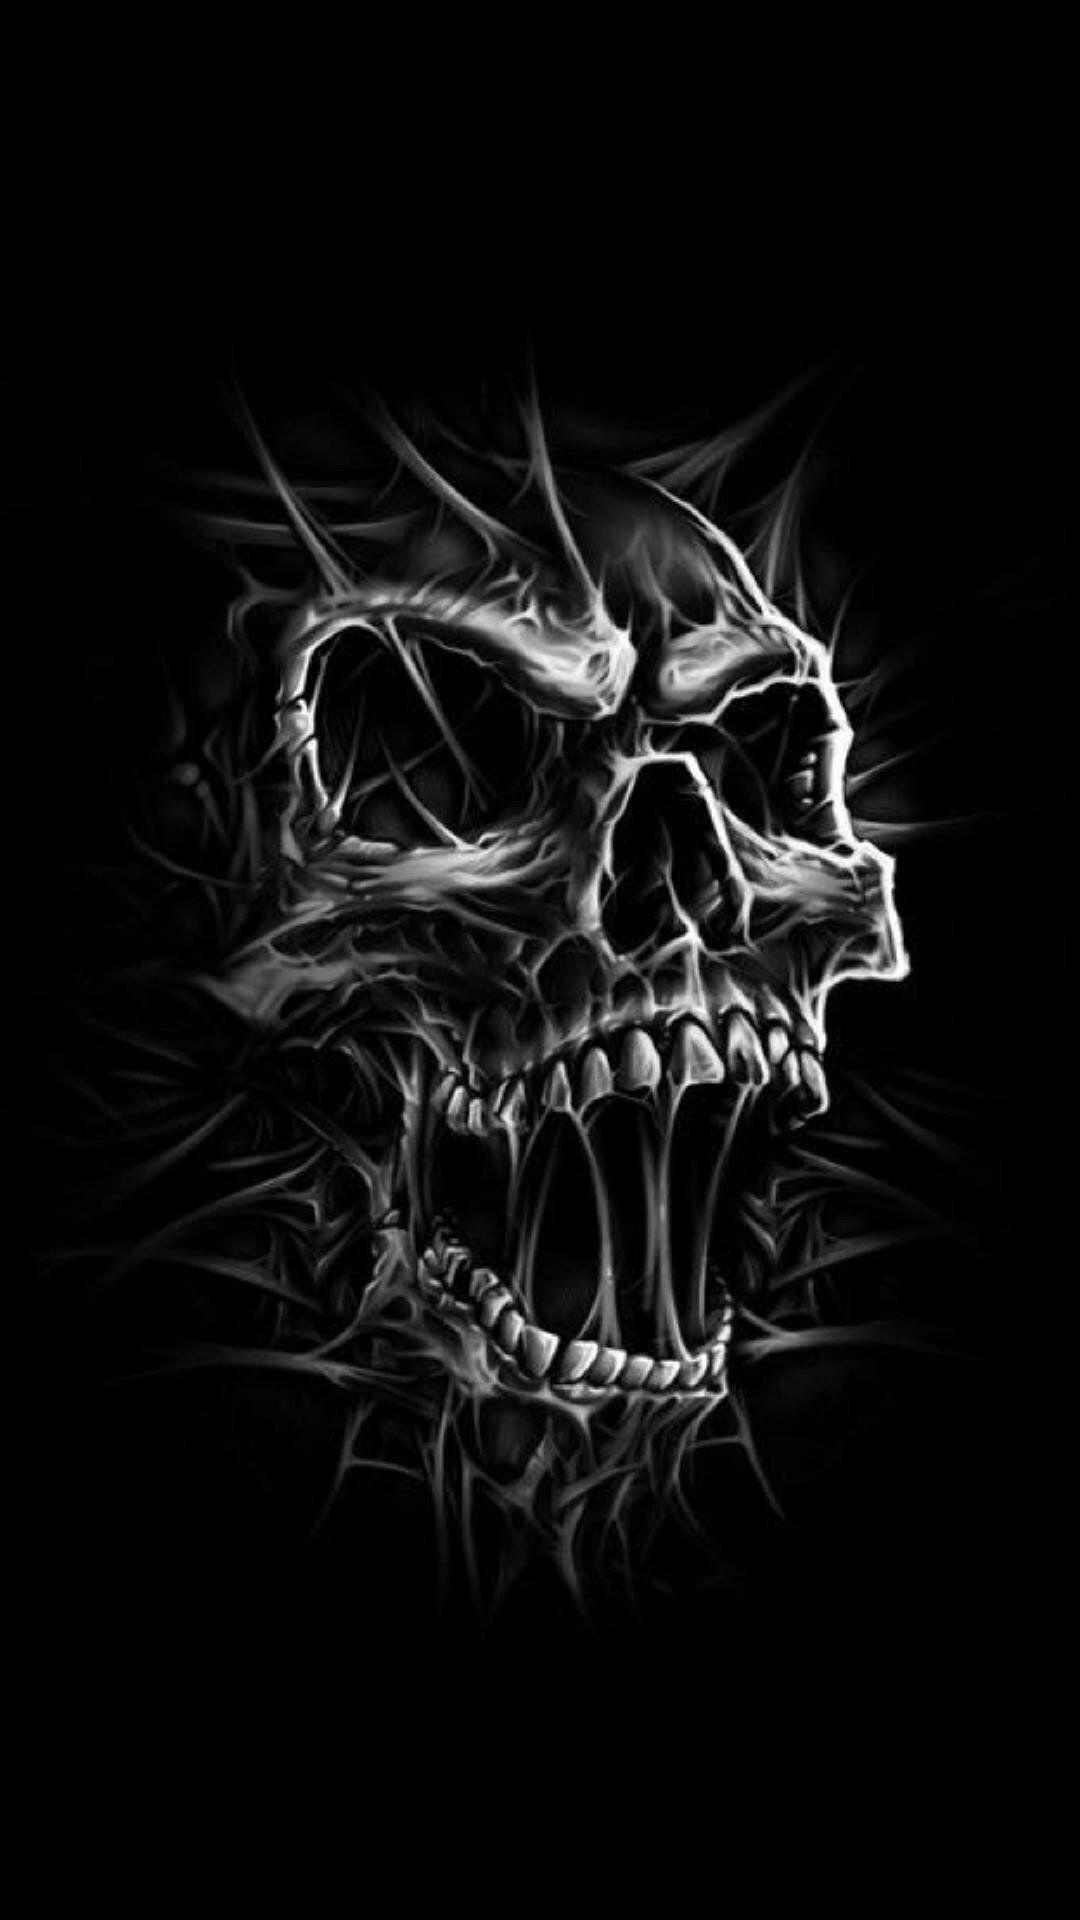 Bloody Skull Wallpapers Top Free Bloody Skull Backgrounds